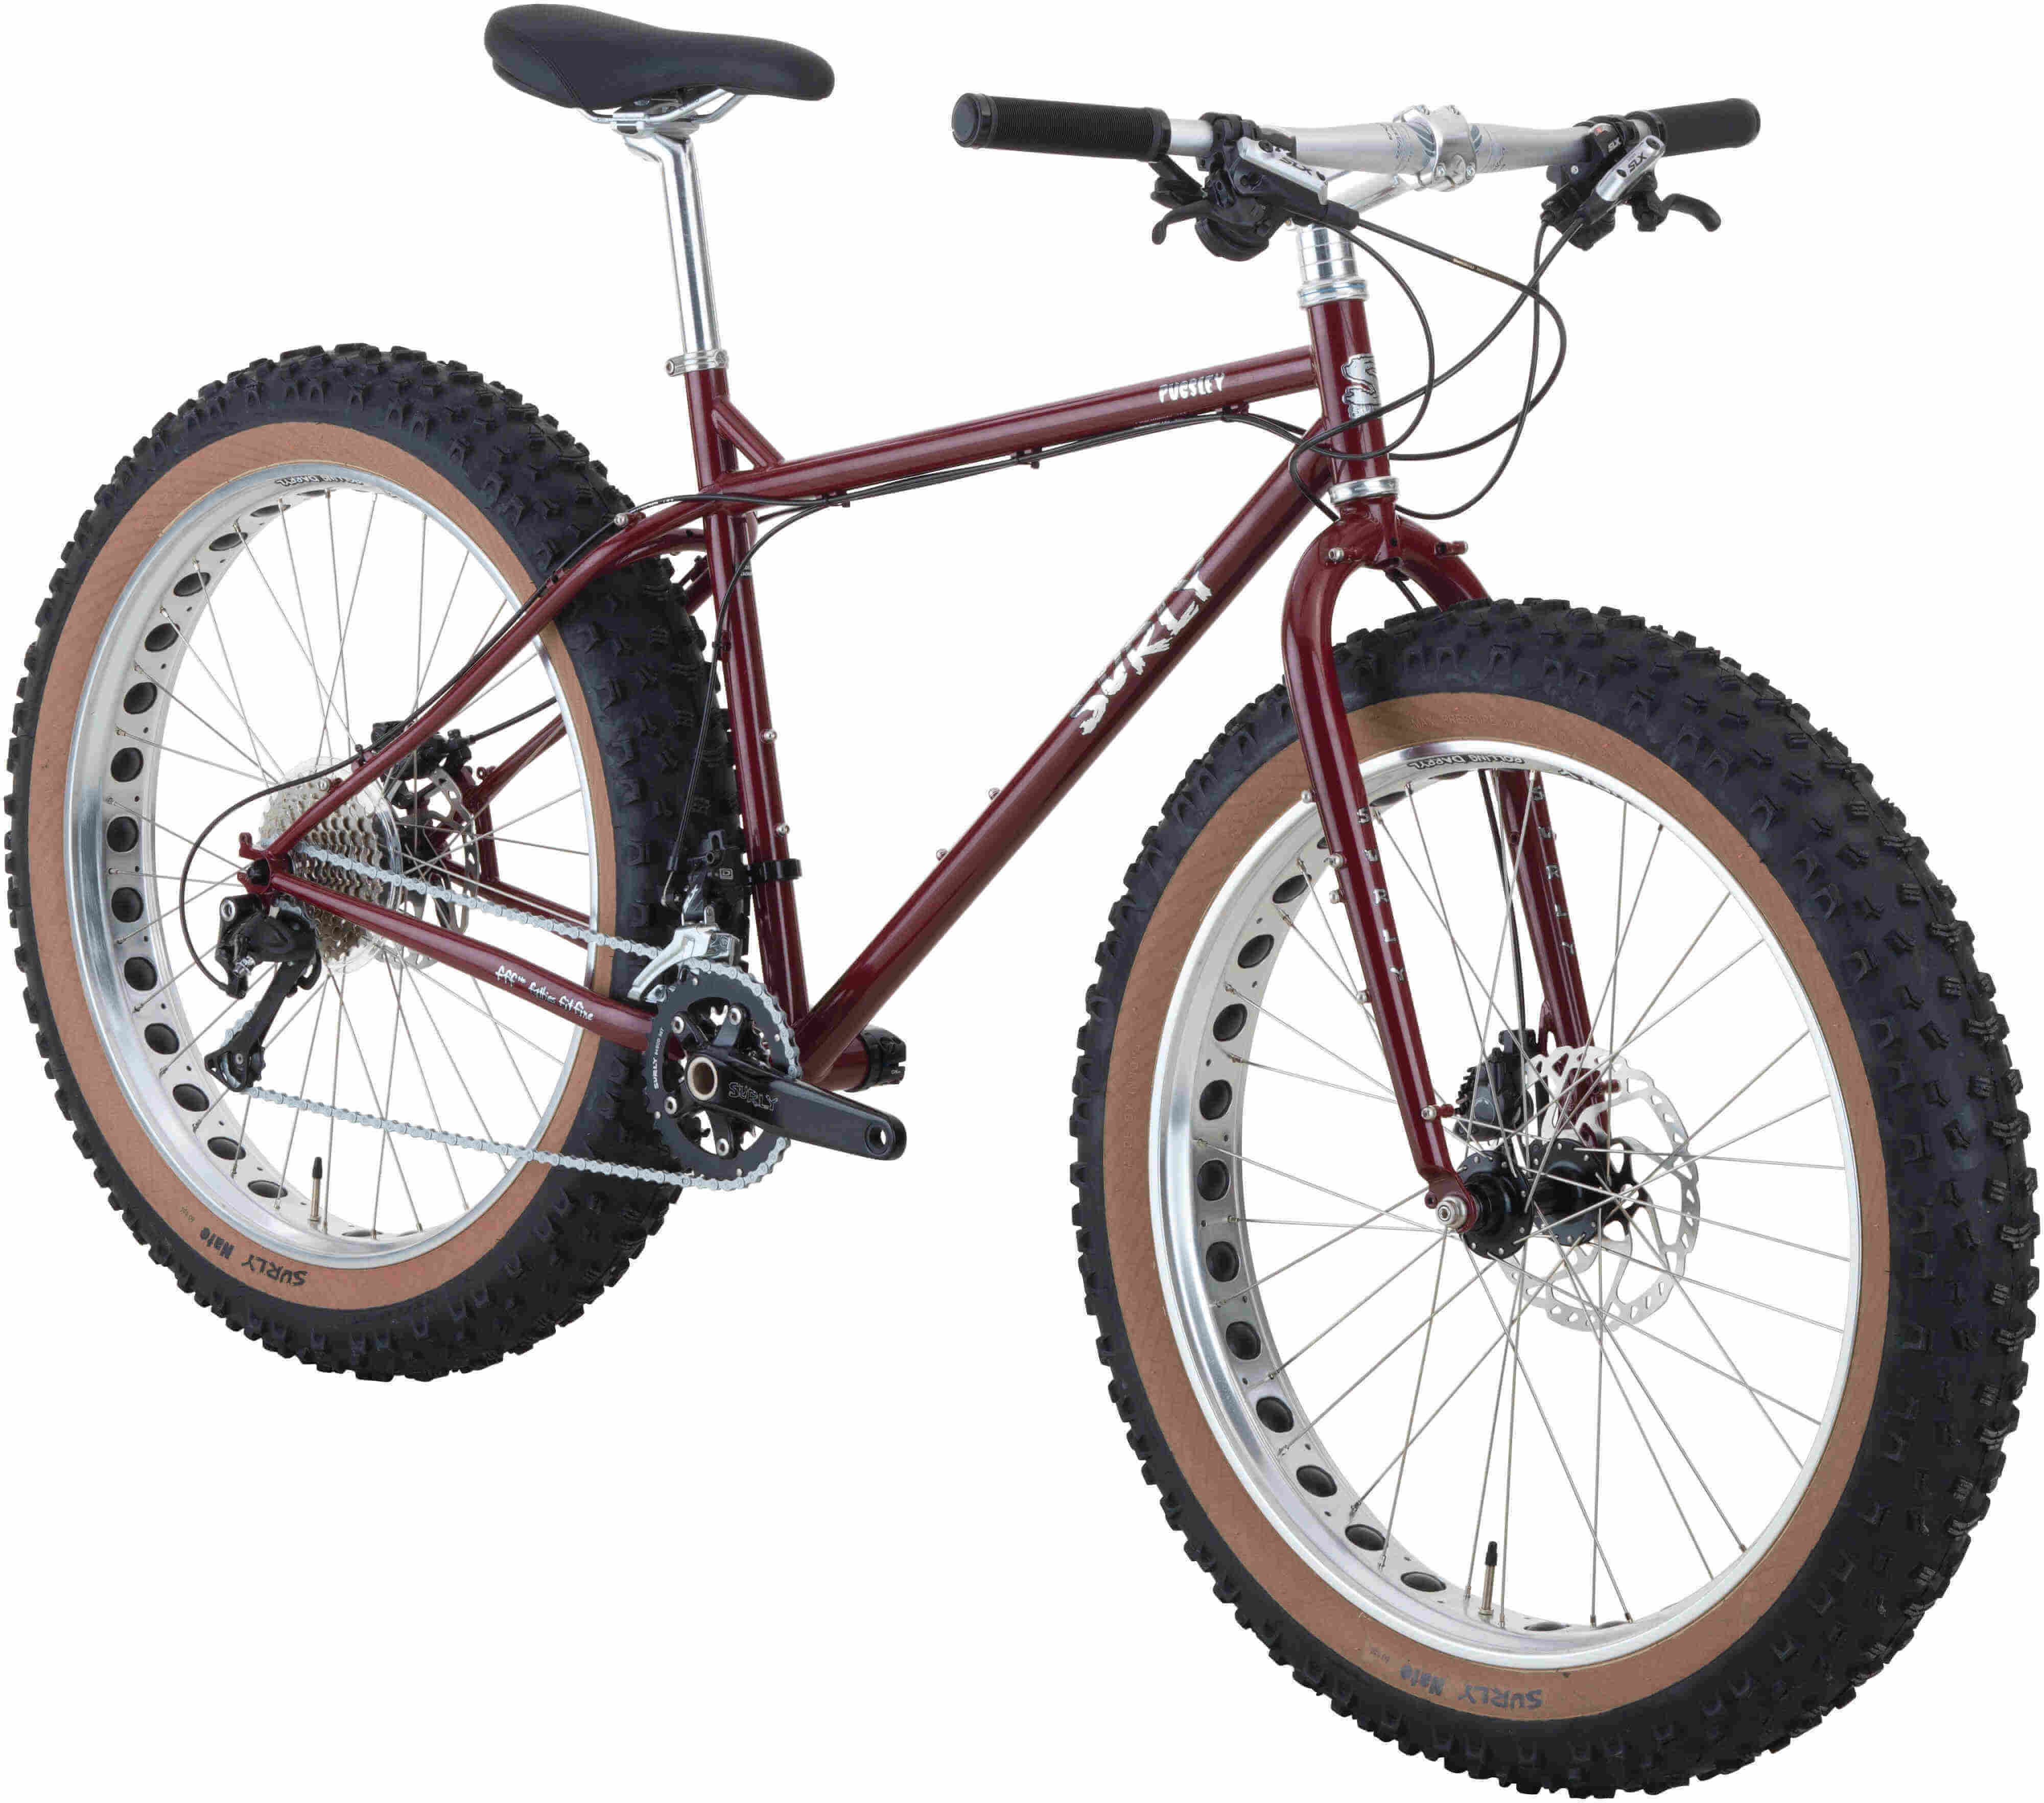 Surly Pugsley fat bike with gumwall tires - dark red - Front, right side view with white background